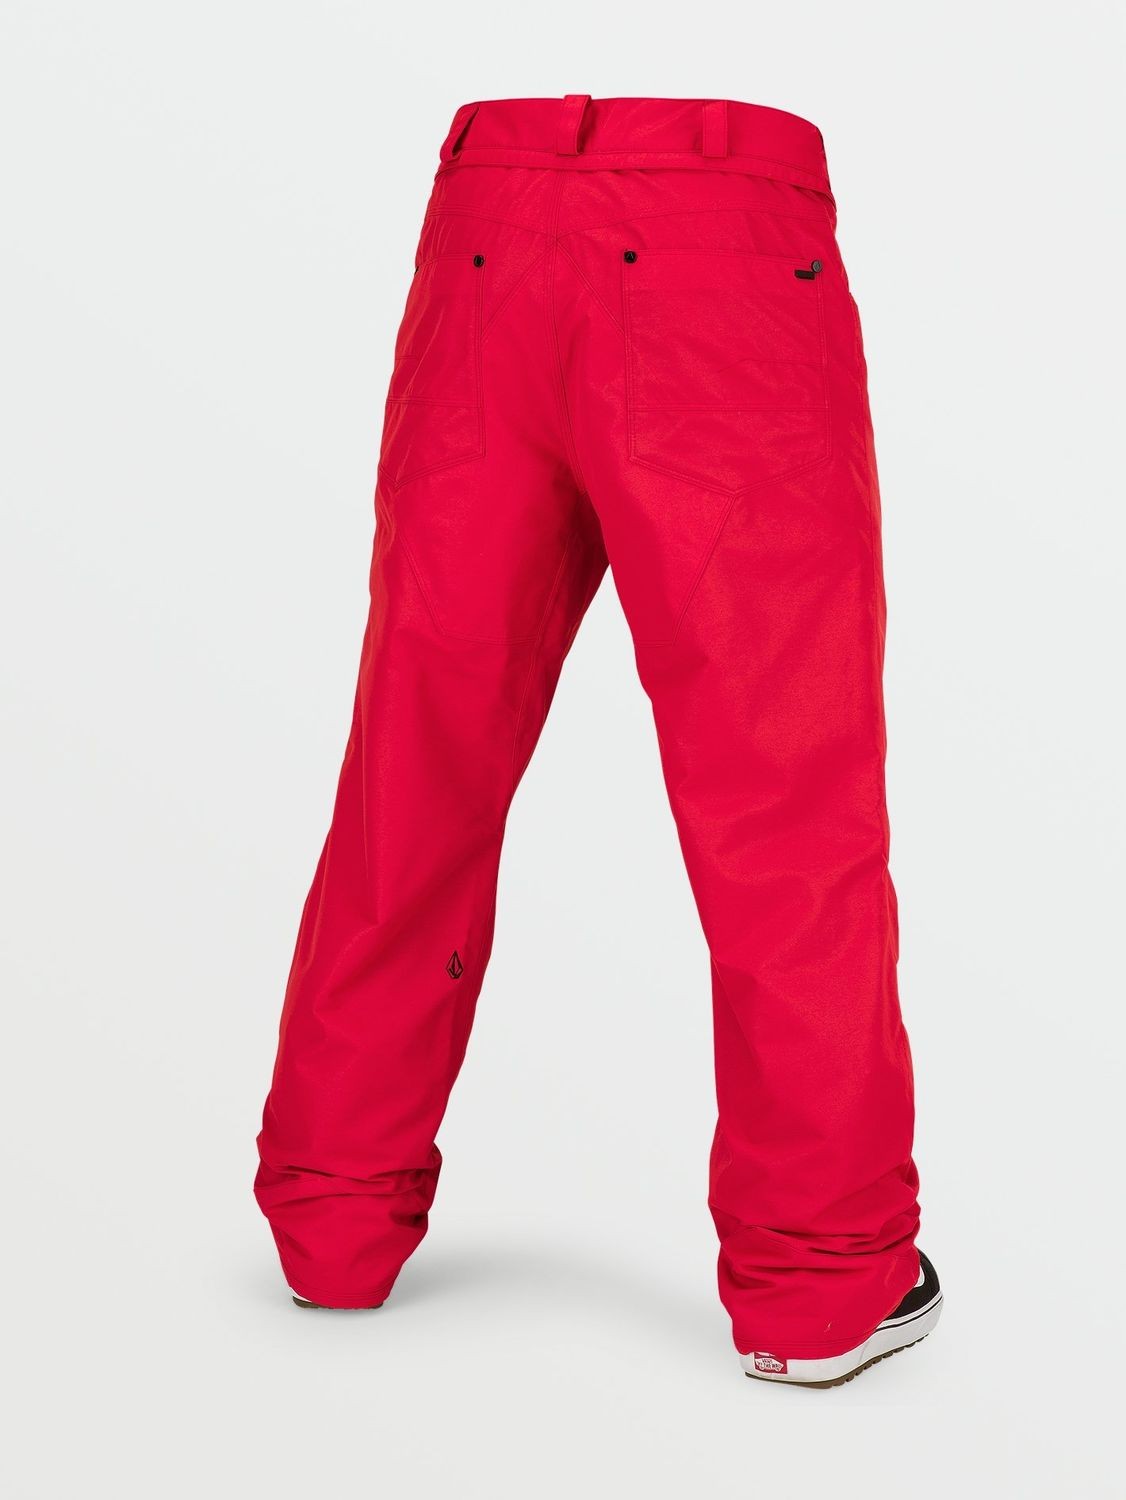 Volcom Carbon Red Mens Snowboard Pant